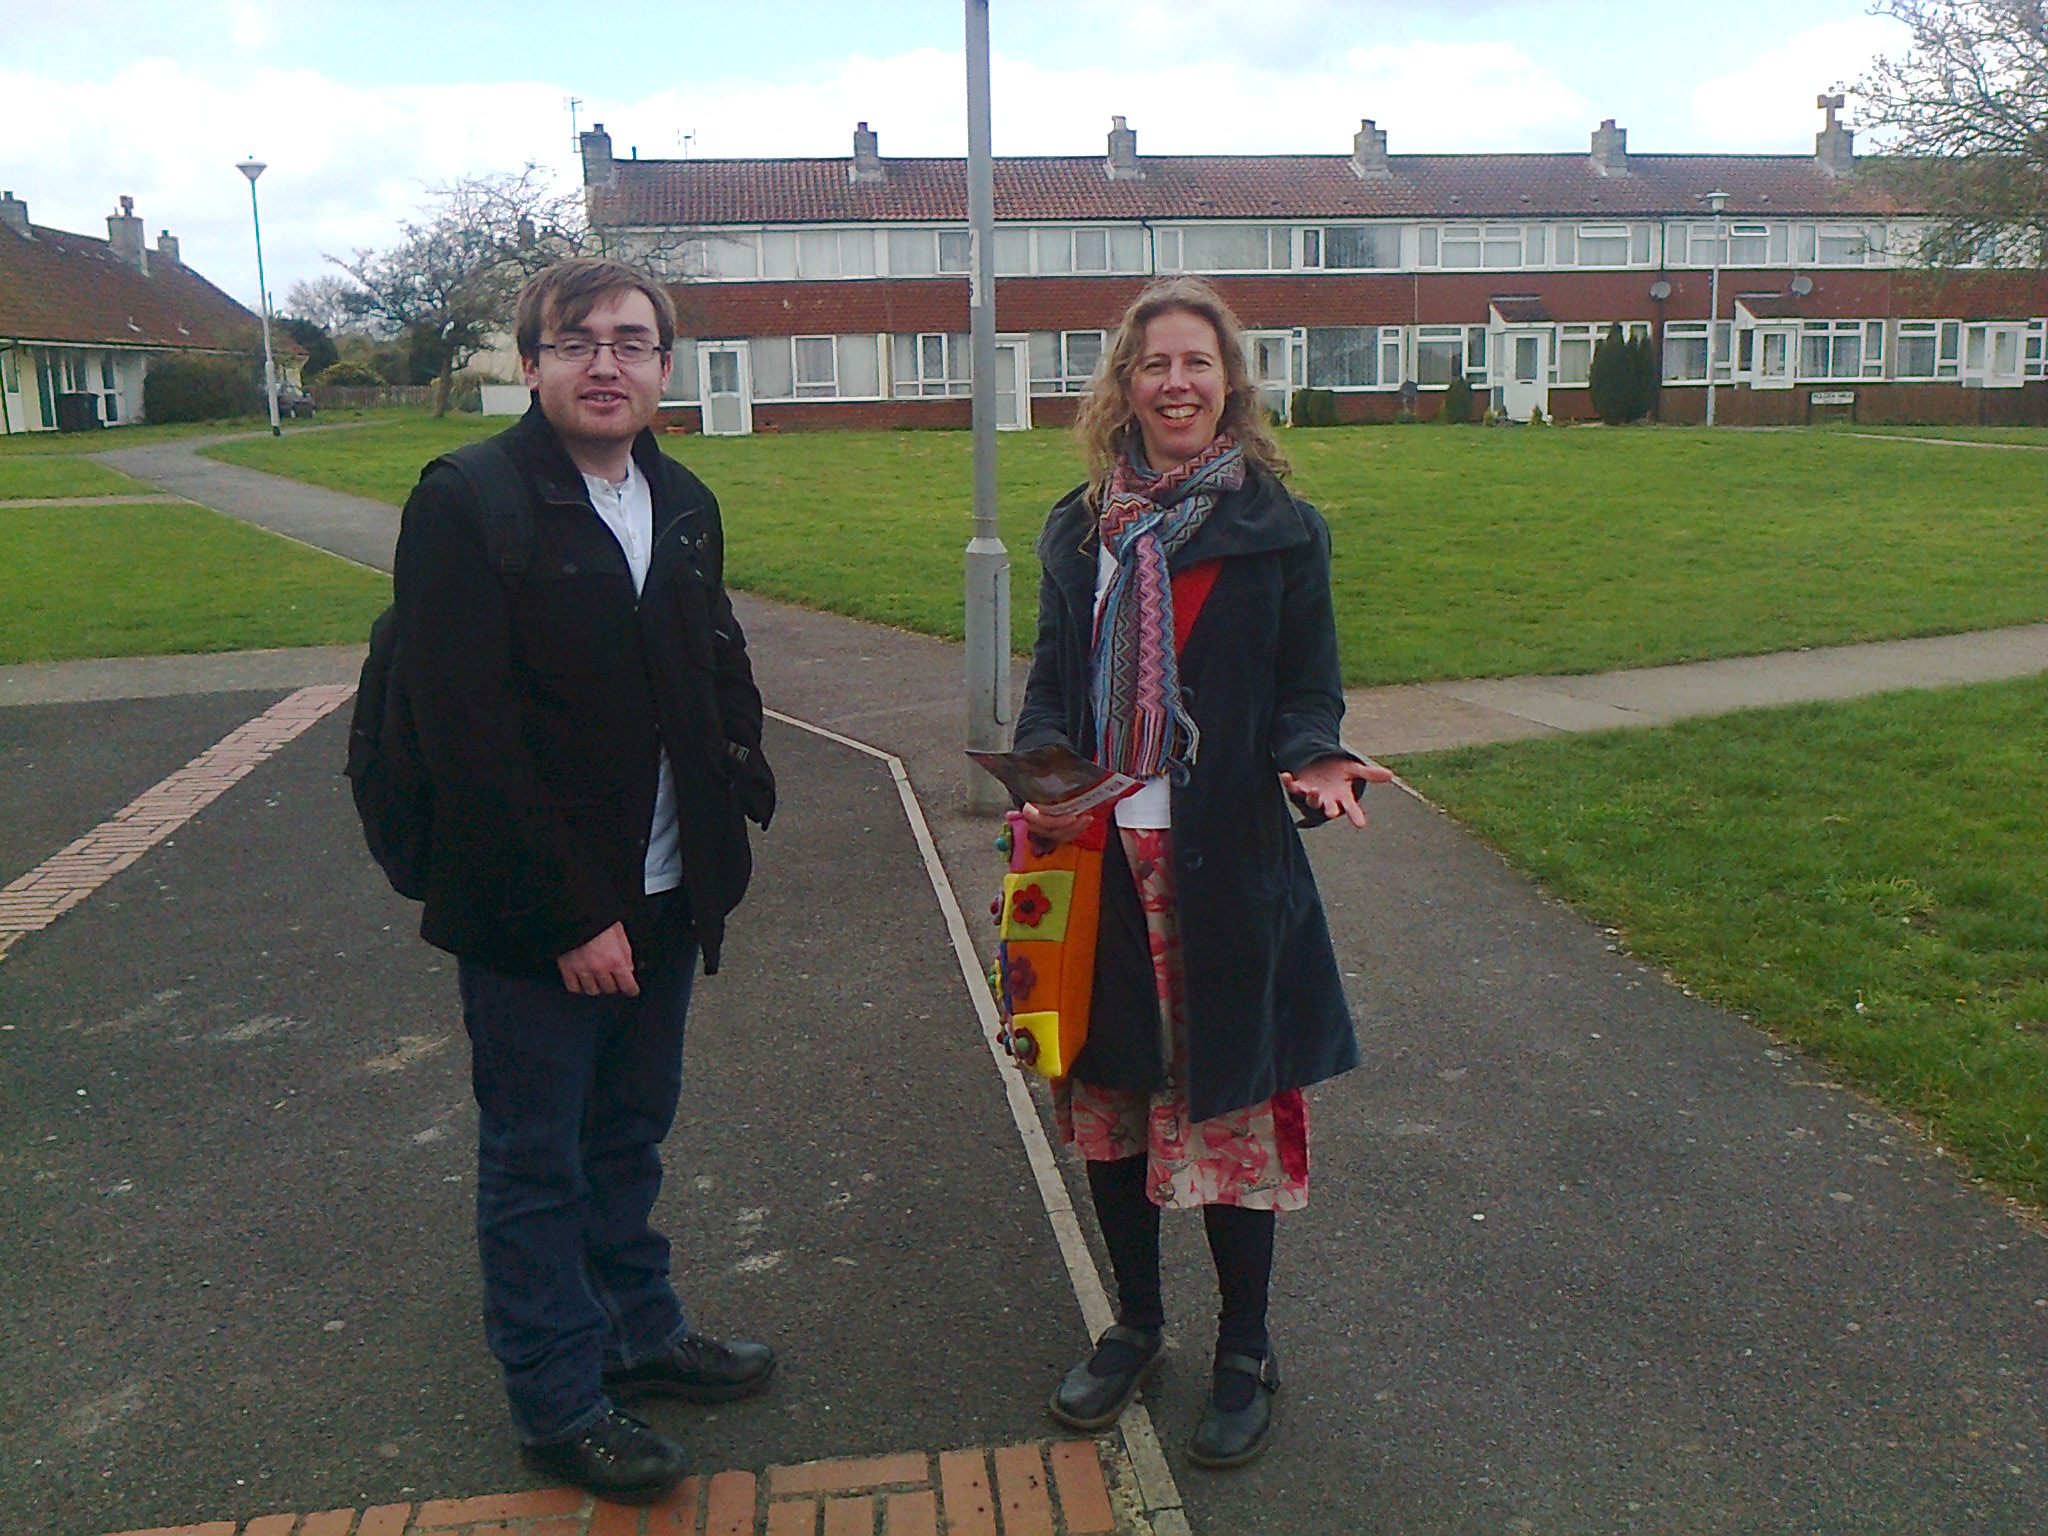 Labour candidate for Huntspill Alexia Bartlett on the campaign trail in Woolavington